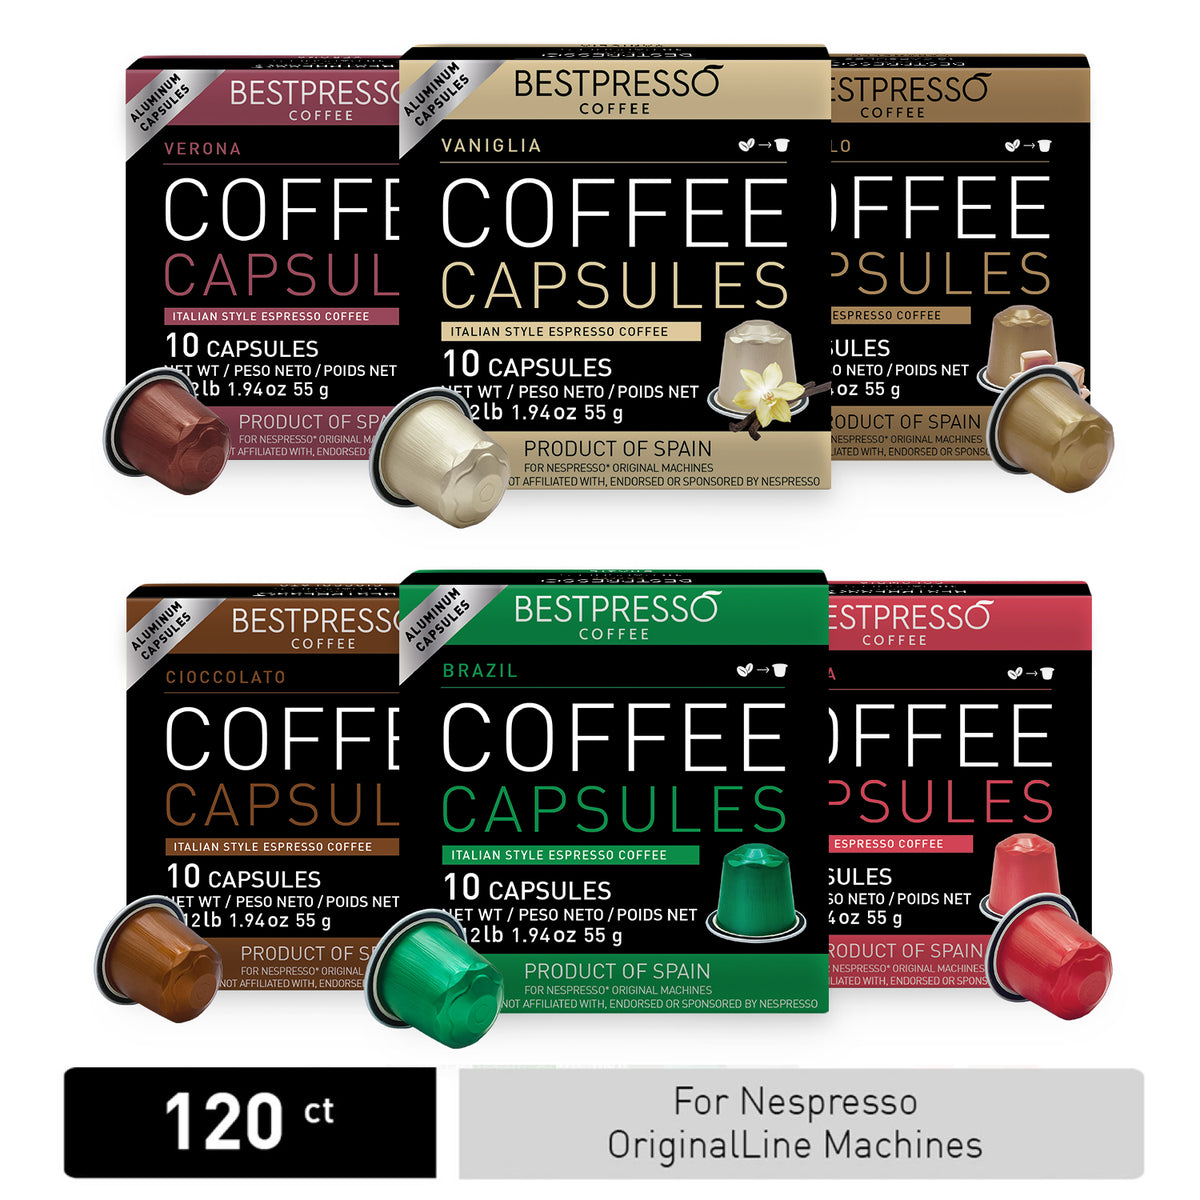 120 Aluminum Bestpresso Coffee Capsules for Nespresso (6 Flavors) $25.20 w/ Subscribe & Save + Free Shipping